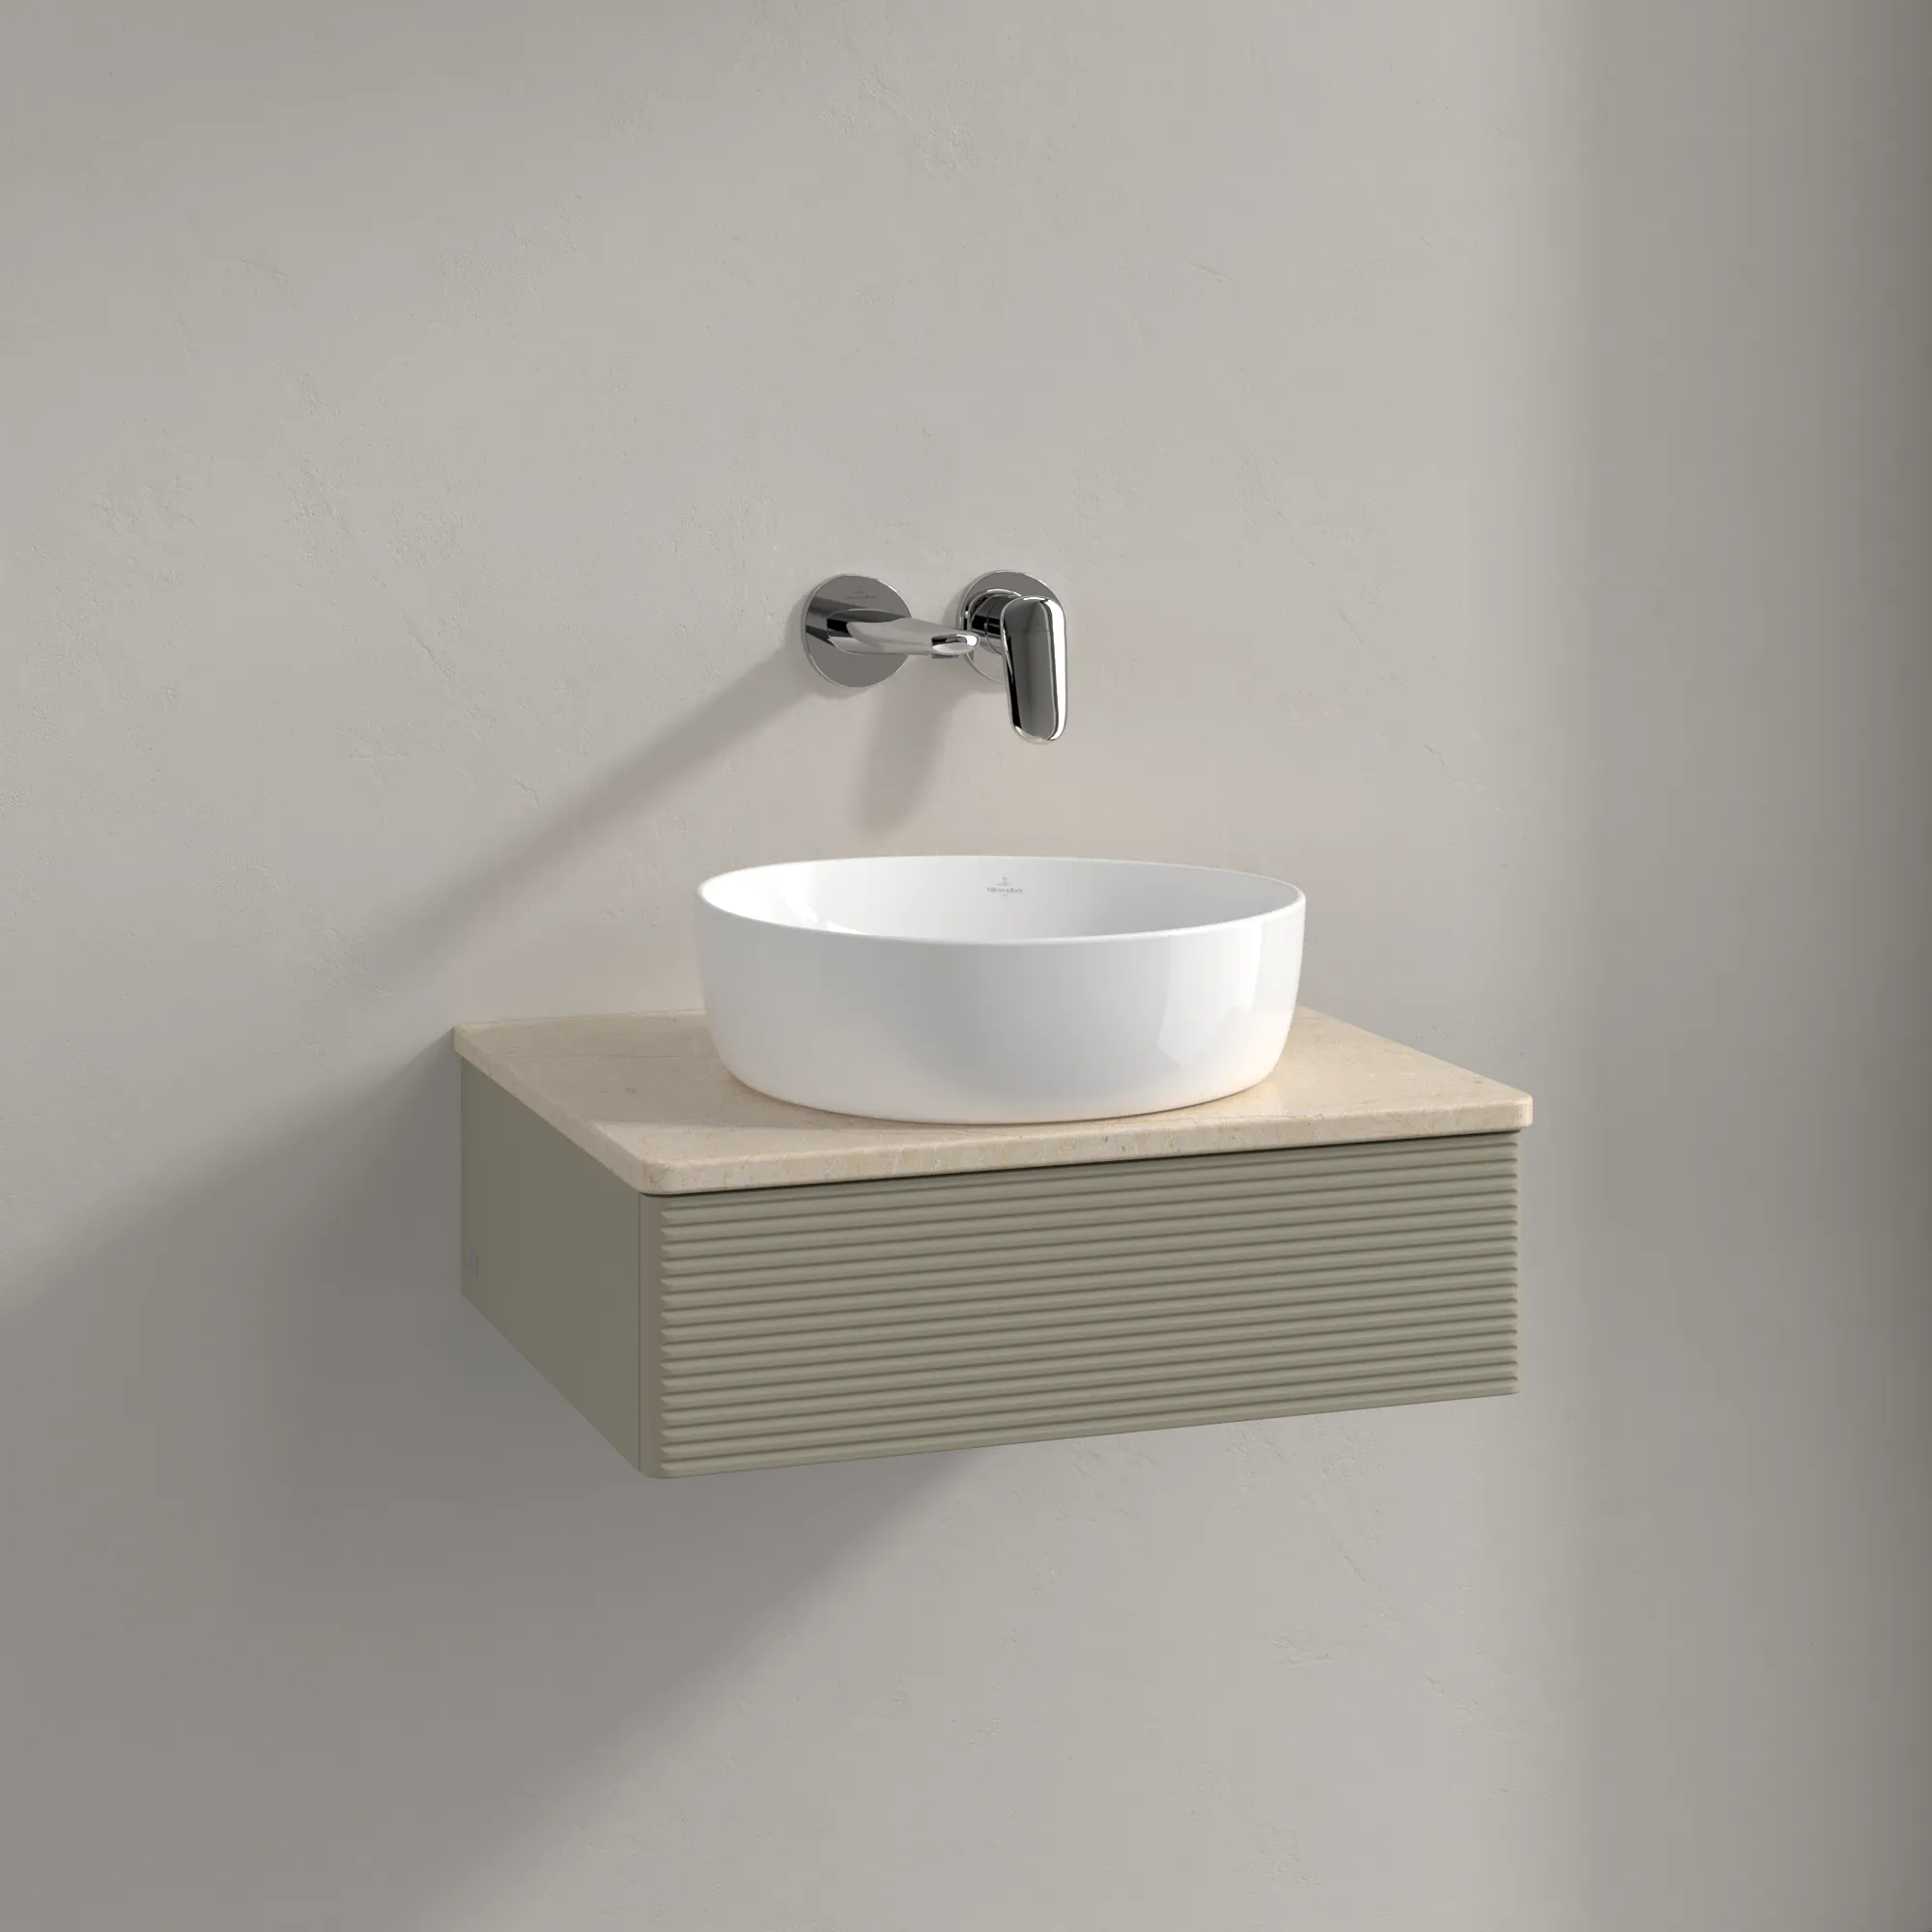 Picture of VILLEROY BOCH Antao Vanity unit, with lighting, 1 pull-out compartment, 600 x 190 x 500 mm, Front with grain texture, Stone Grey Matt Lacquer / Botticino #L07113HK